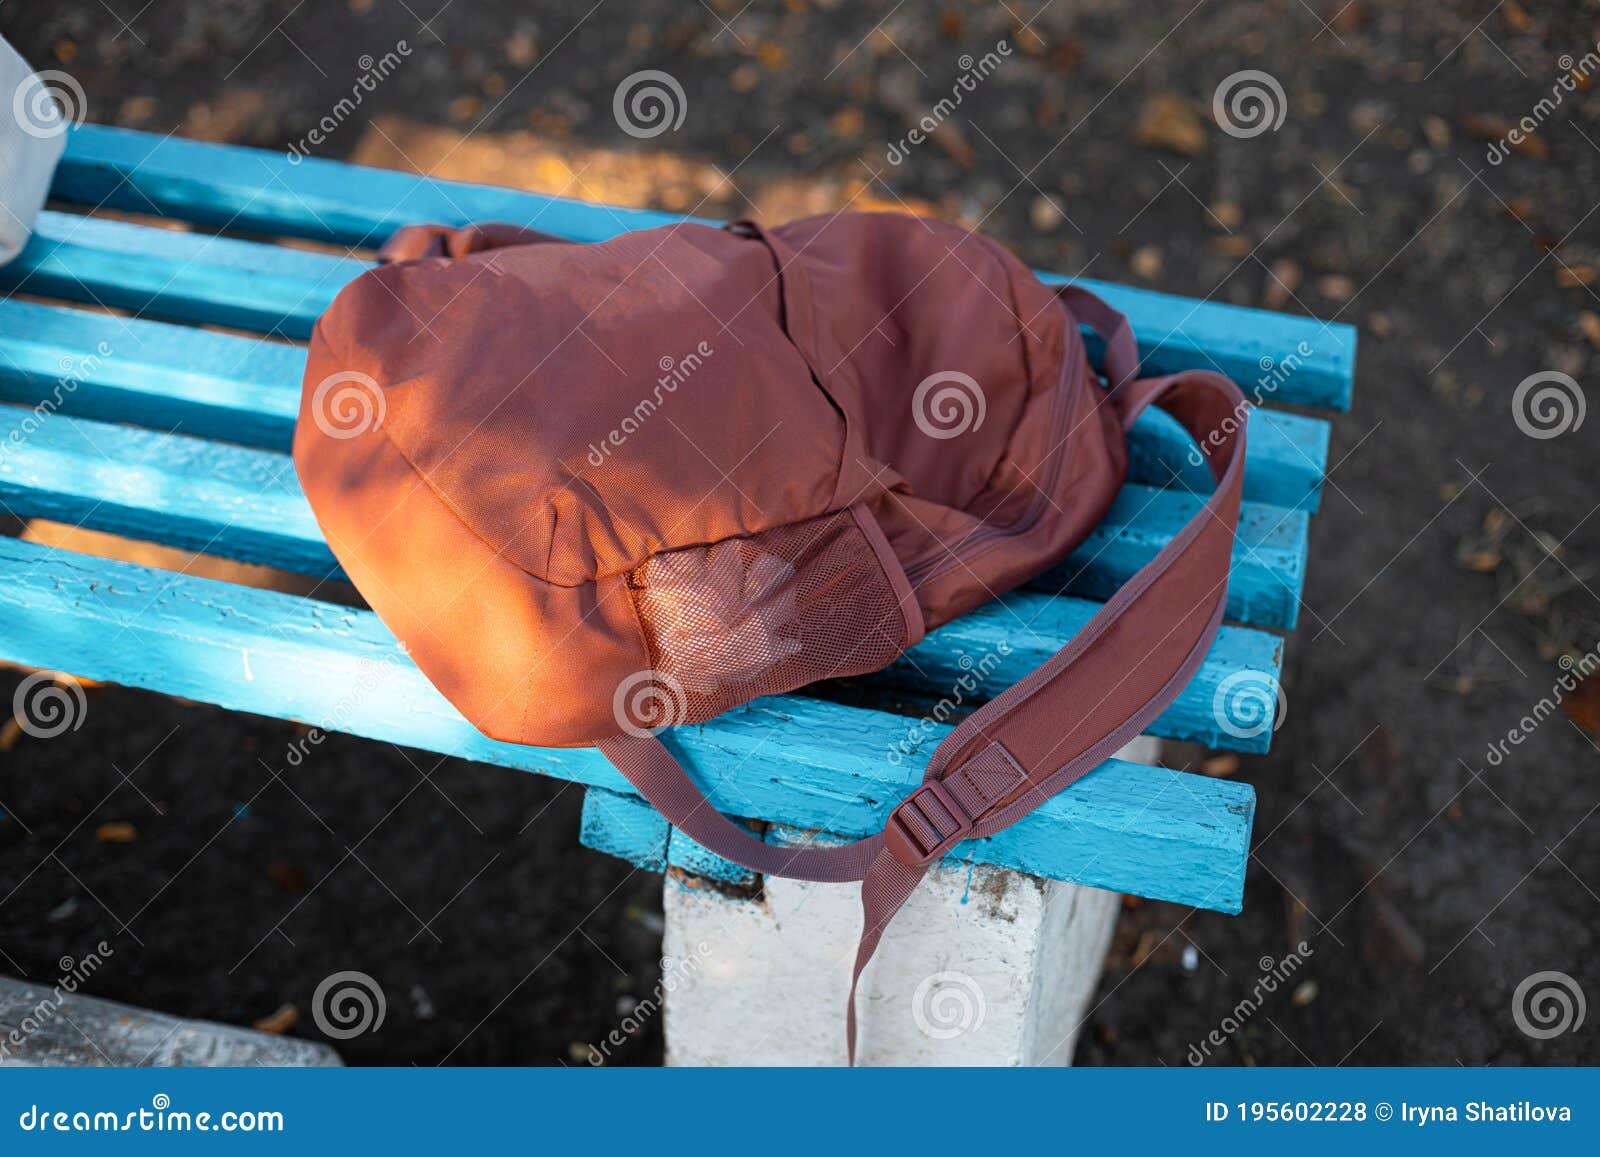 Sports Backpack with on a Bench Outdoors Stock Photo - Image of ...